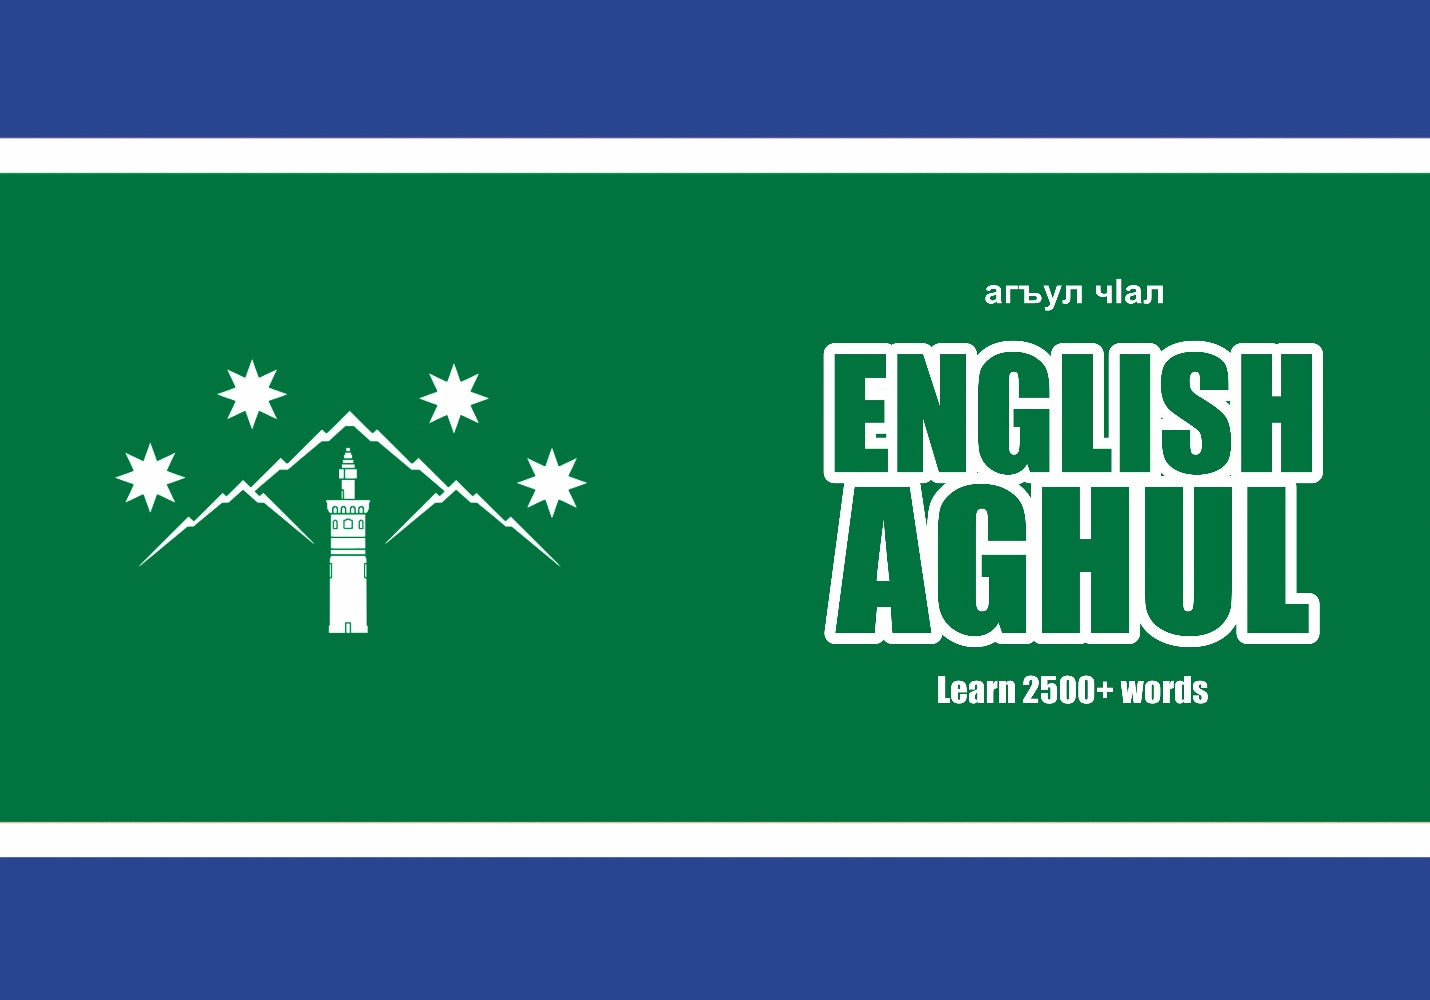 Aghul language learning notebook cover